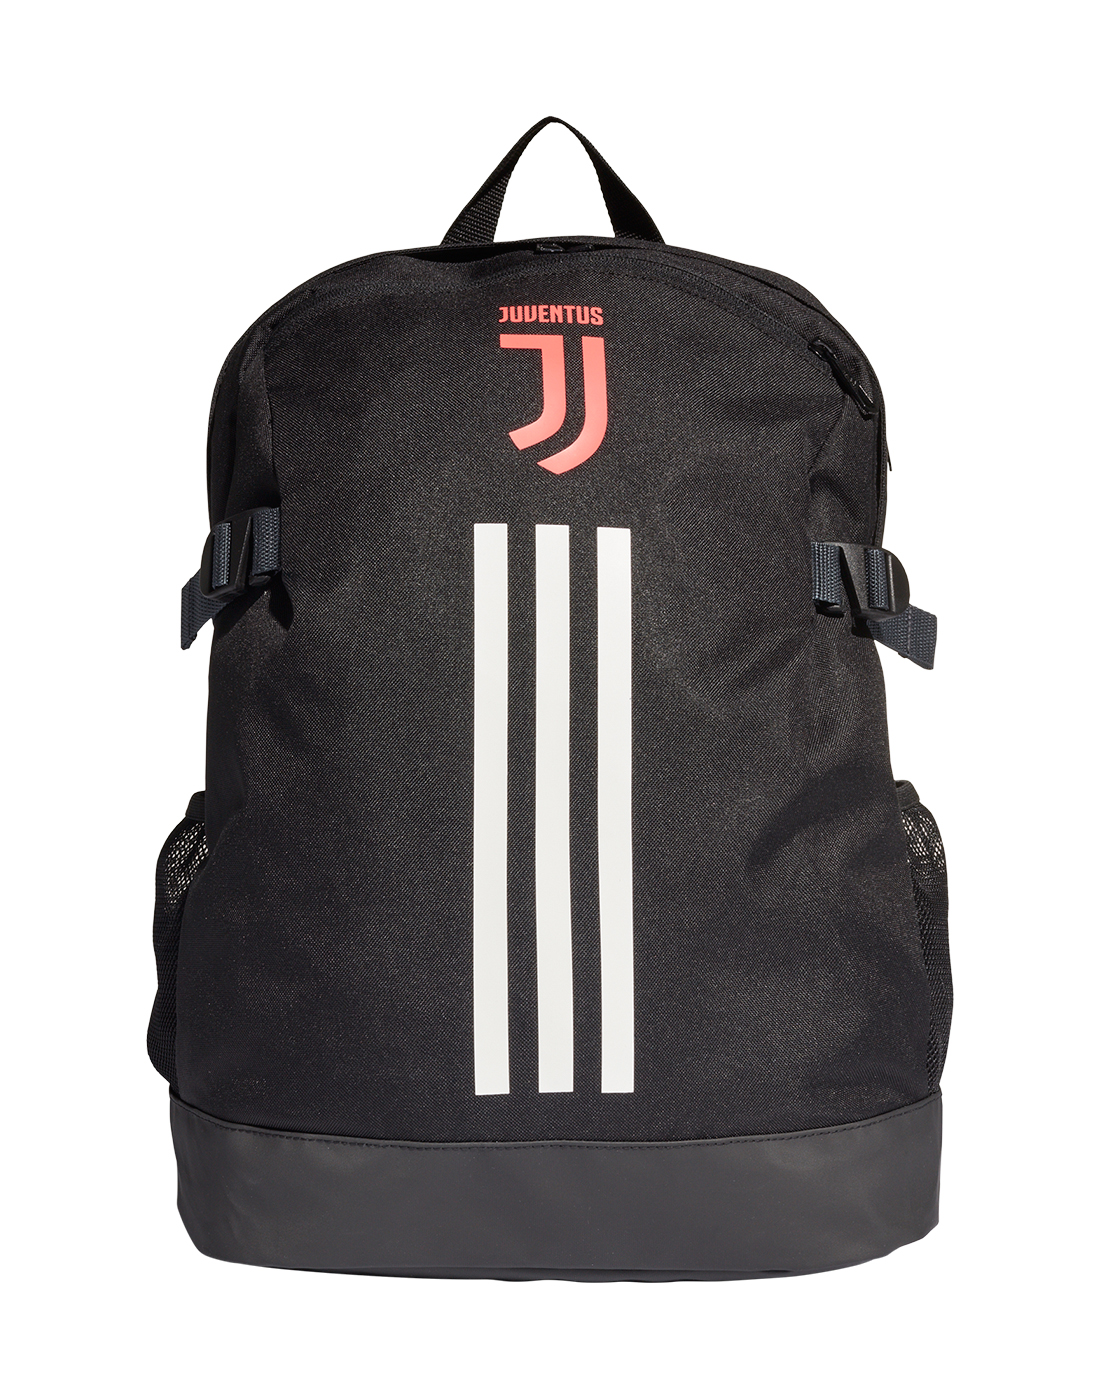 adidas Juventus Back Pack - Black | Life Style Sports IE